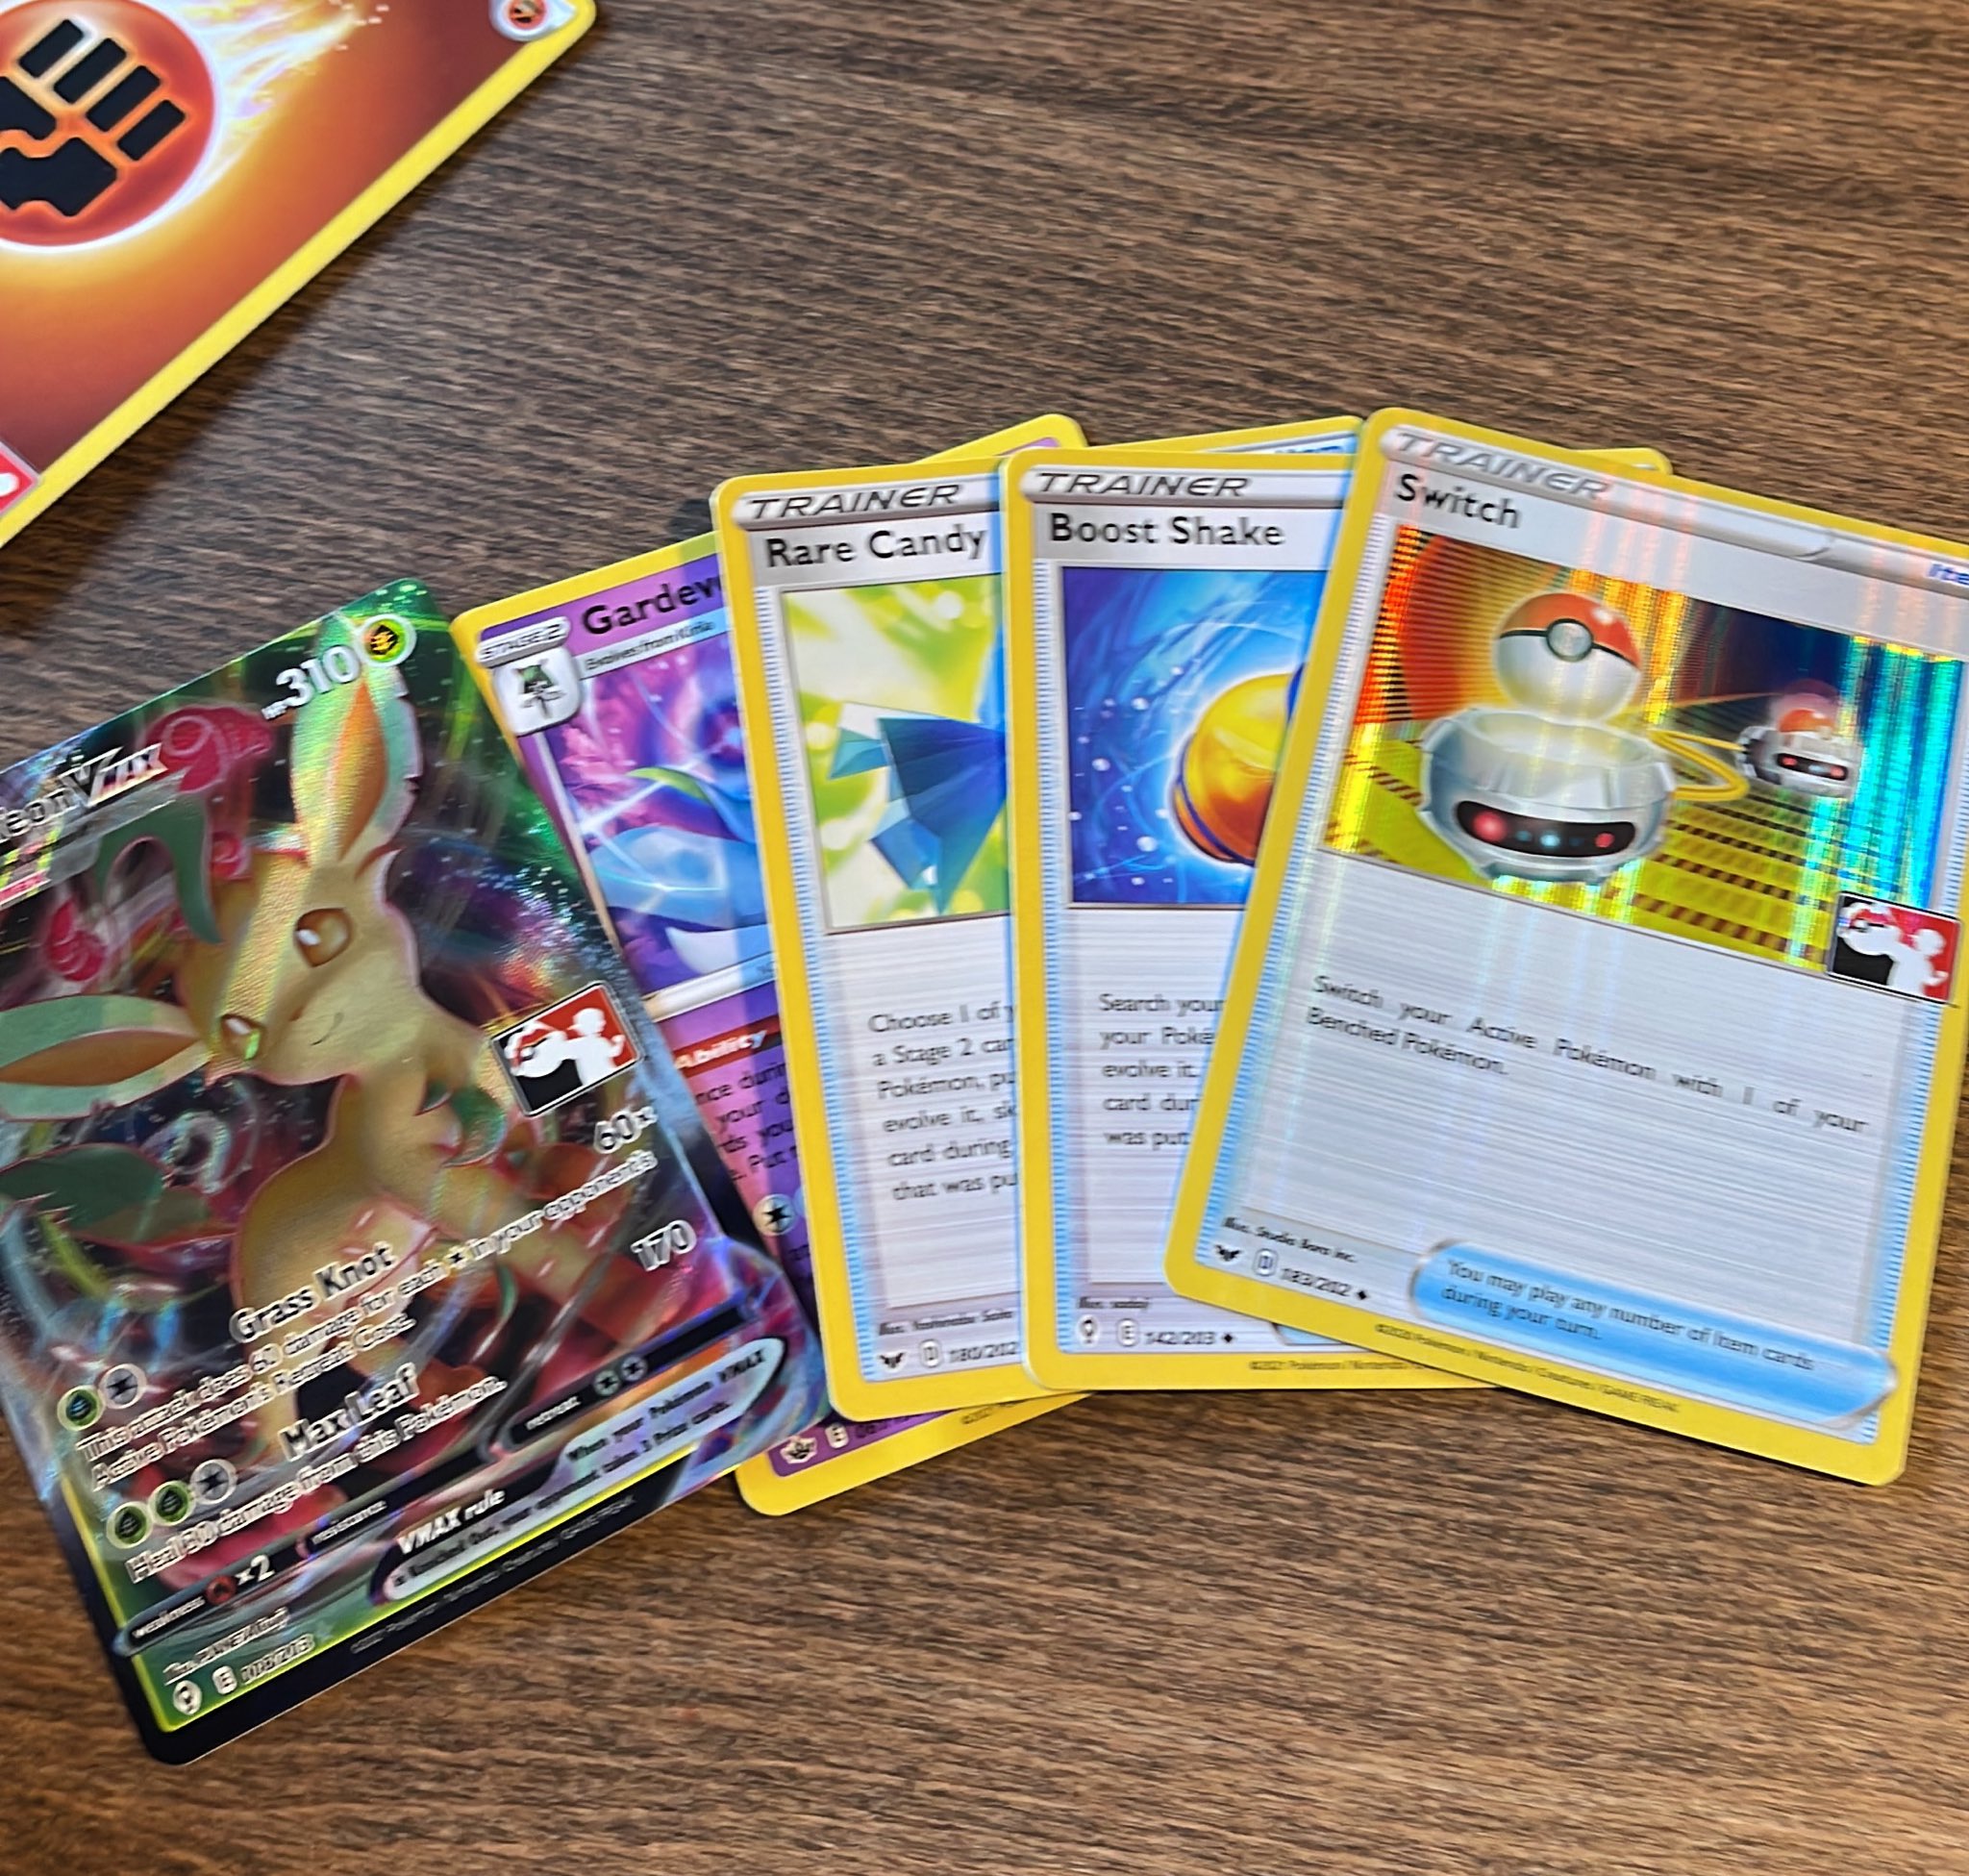 First Look at "Play! Pokemon Prize Packs," Now Arriving at Pokemon